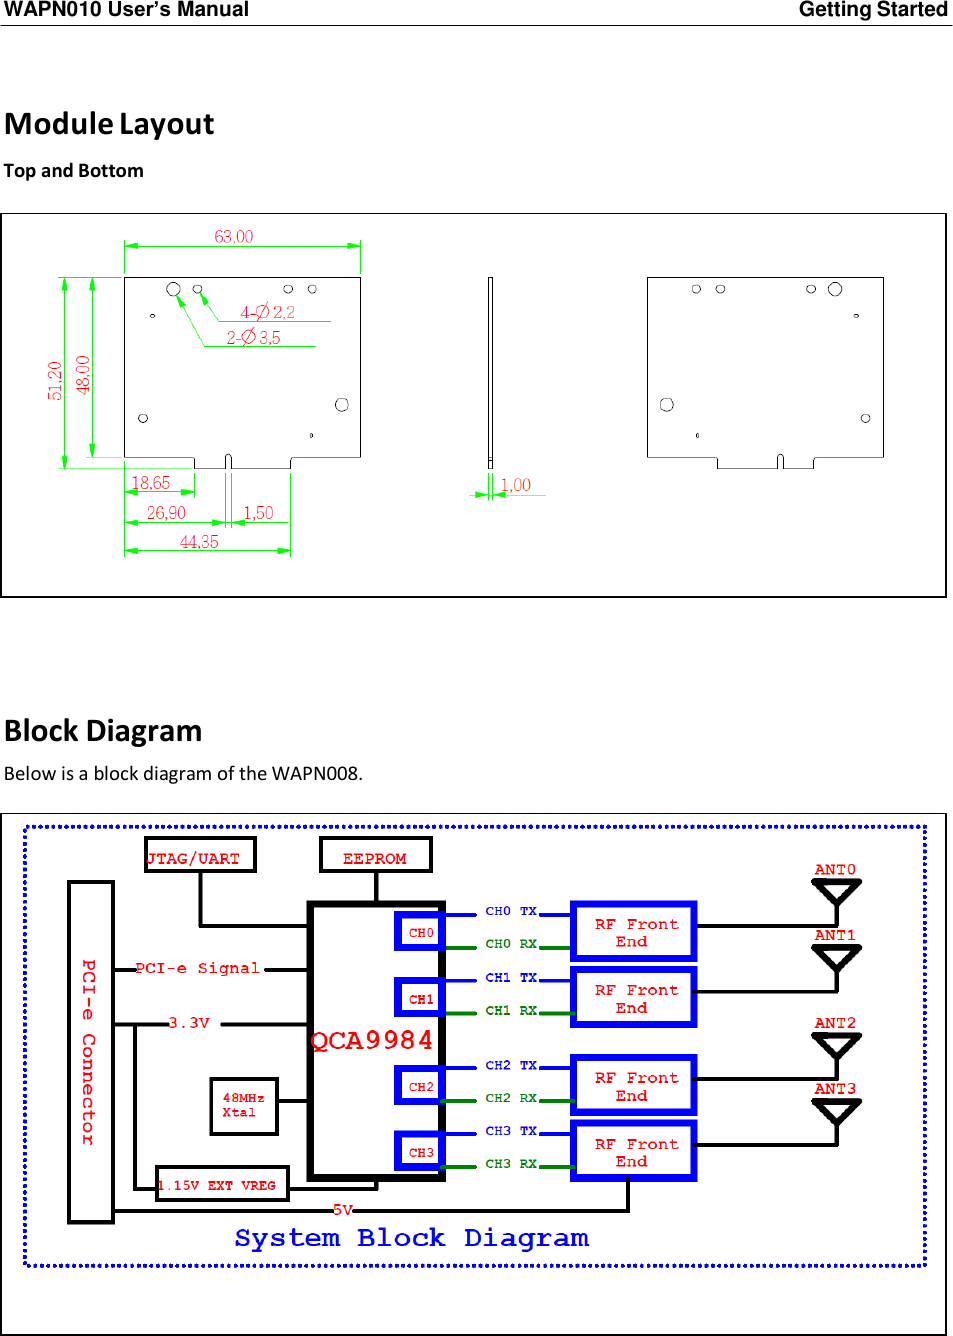         WAPN010 User’s Manual Getting Started    Module Layout Top and Bottom                         Block Diagram  Below is a block diagram of the WAPN008.    